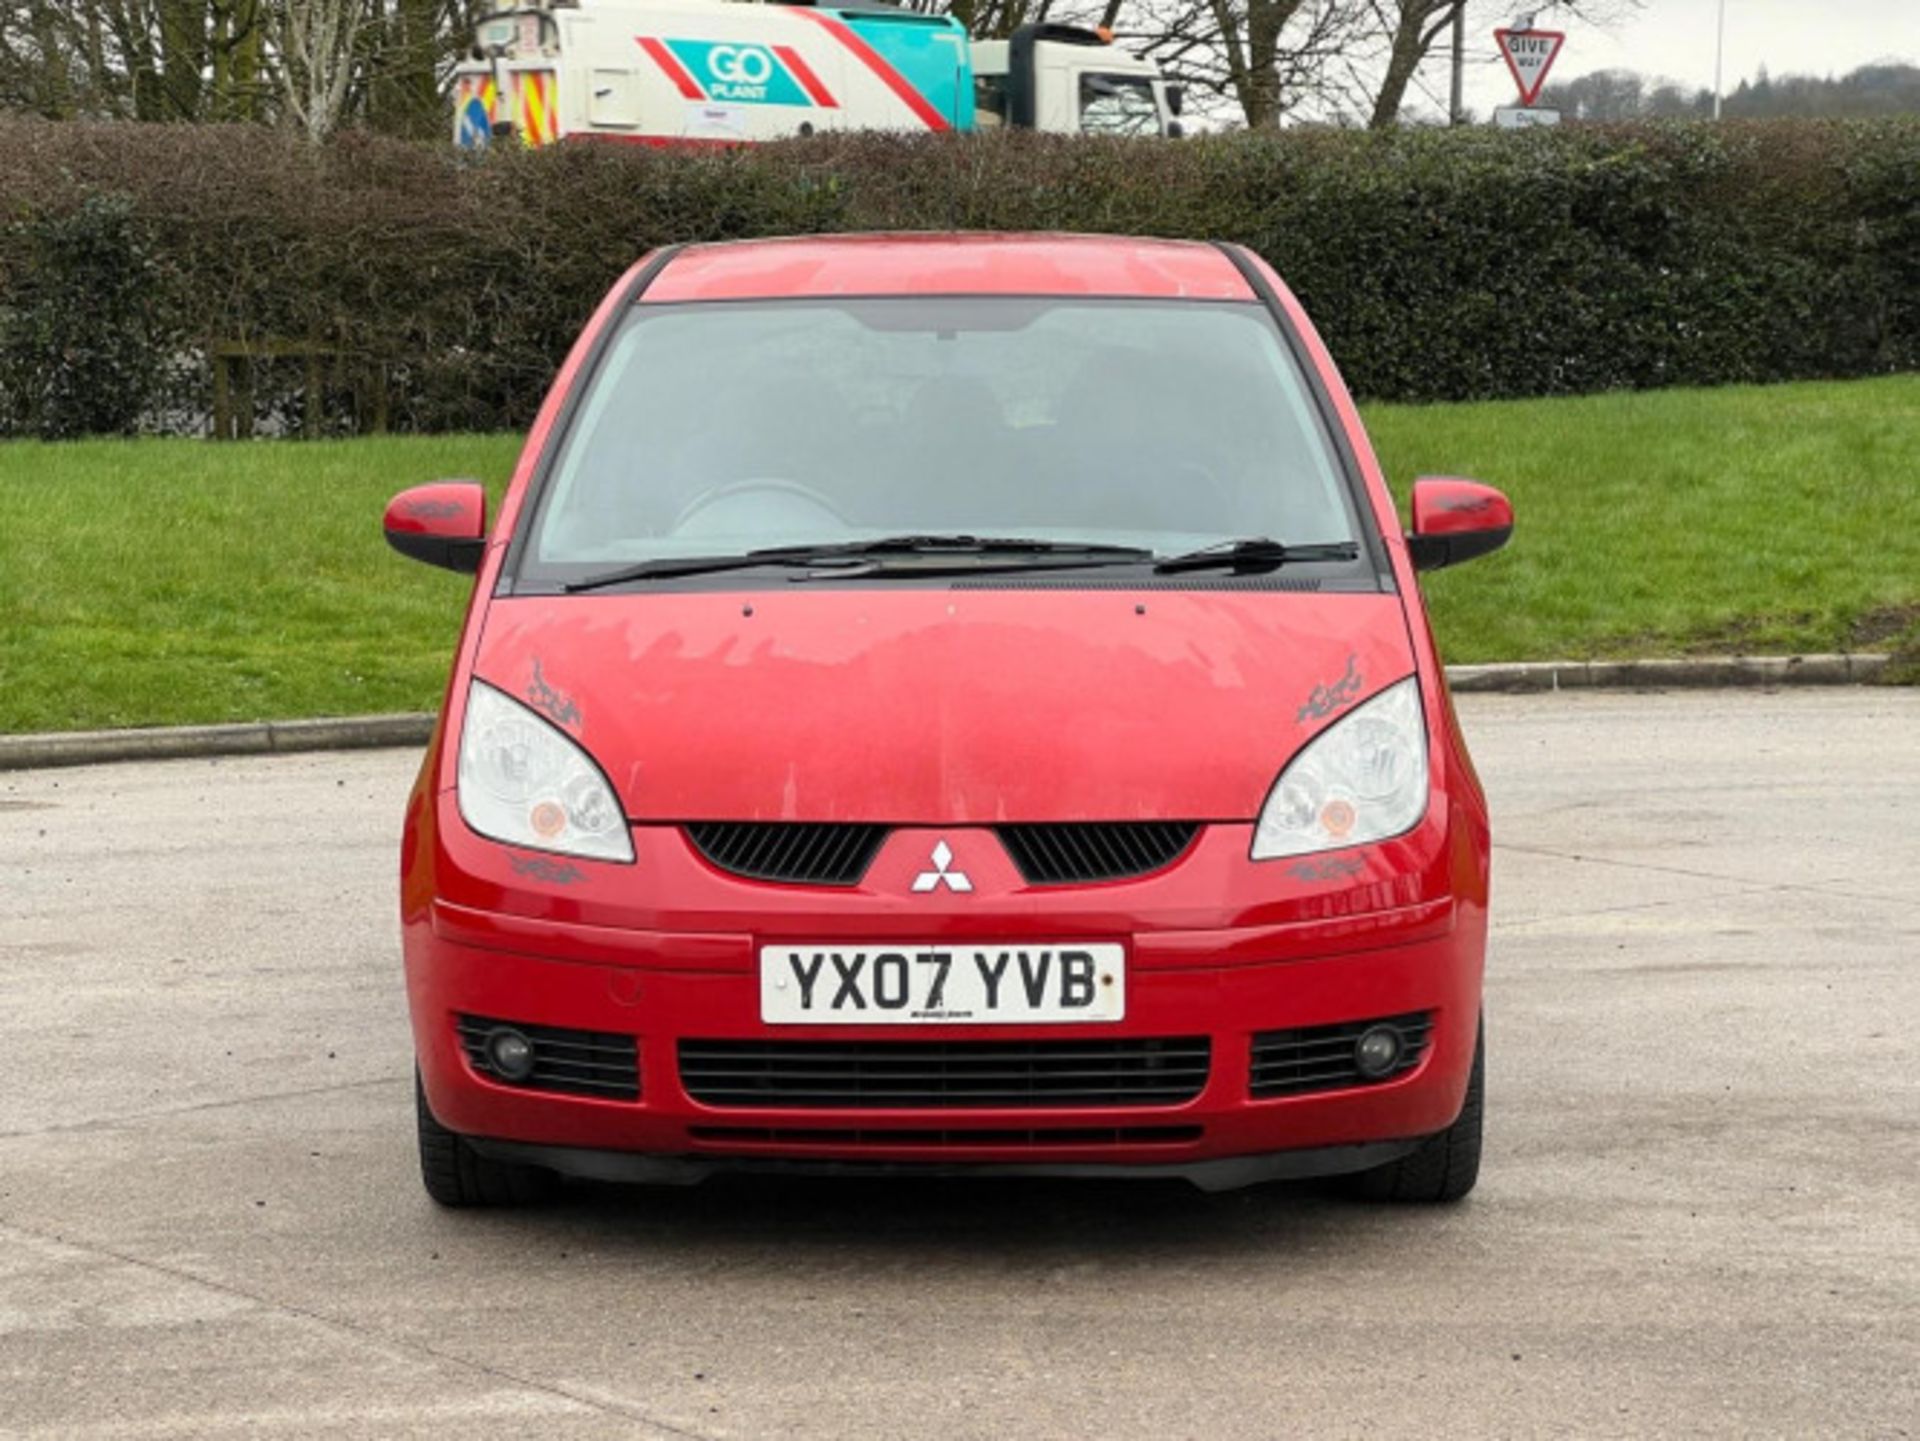 2007 MITSUBISHI COLT 1.5 DI-D DIESEL AUTOMATIC >>--NO VAT ON HAMMER--<< - Image 120 of 127